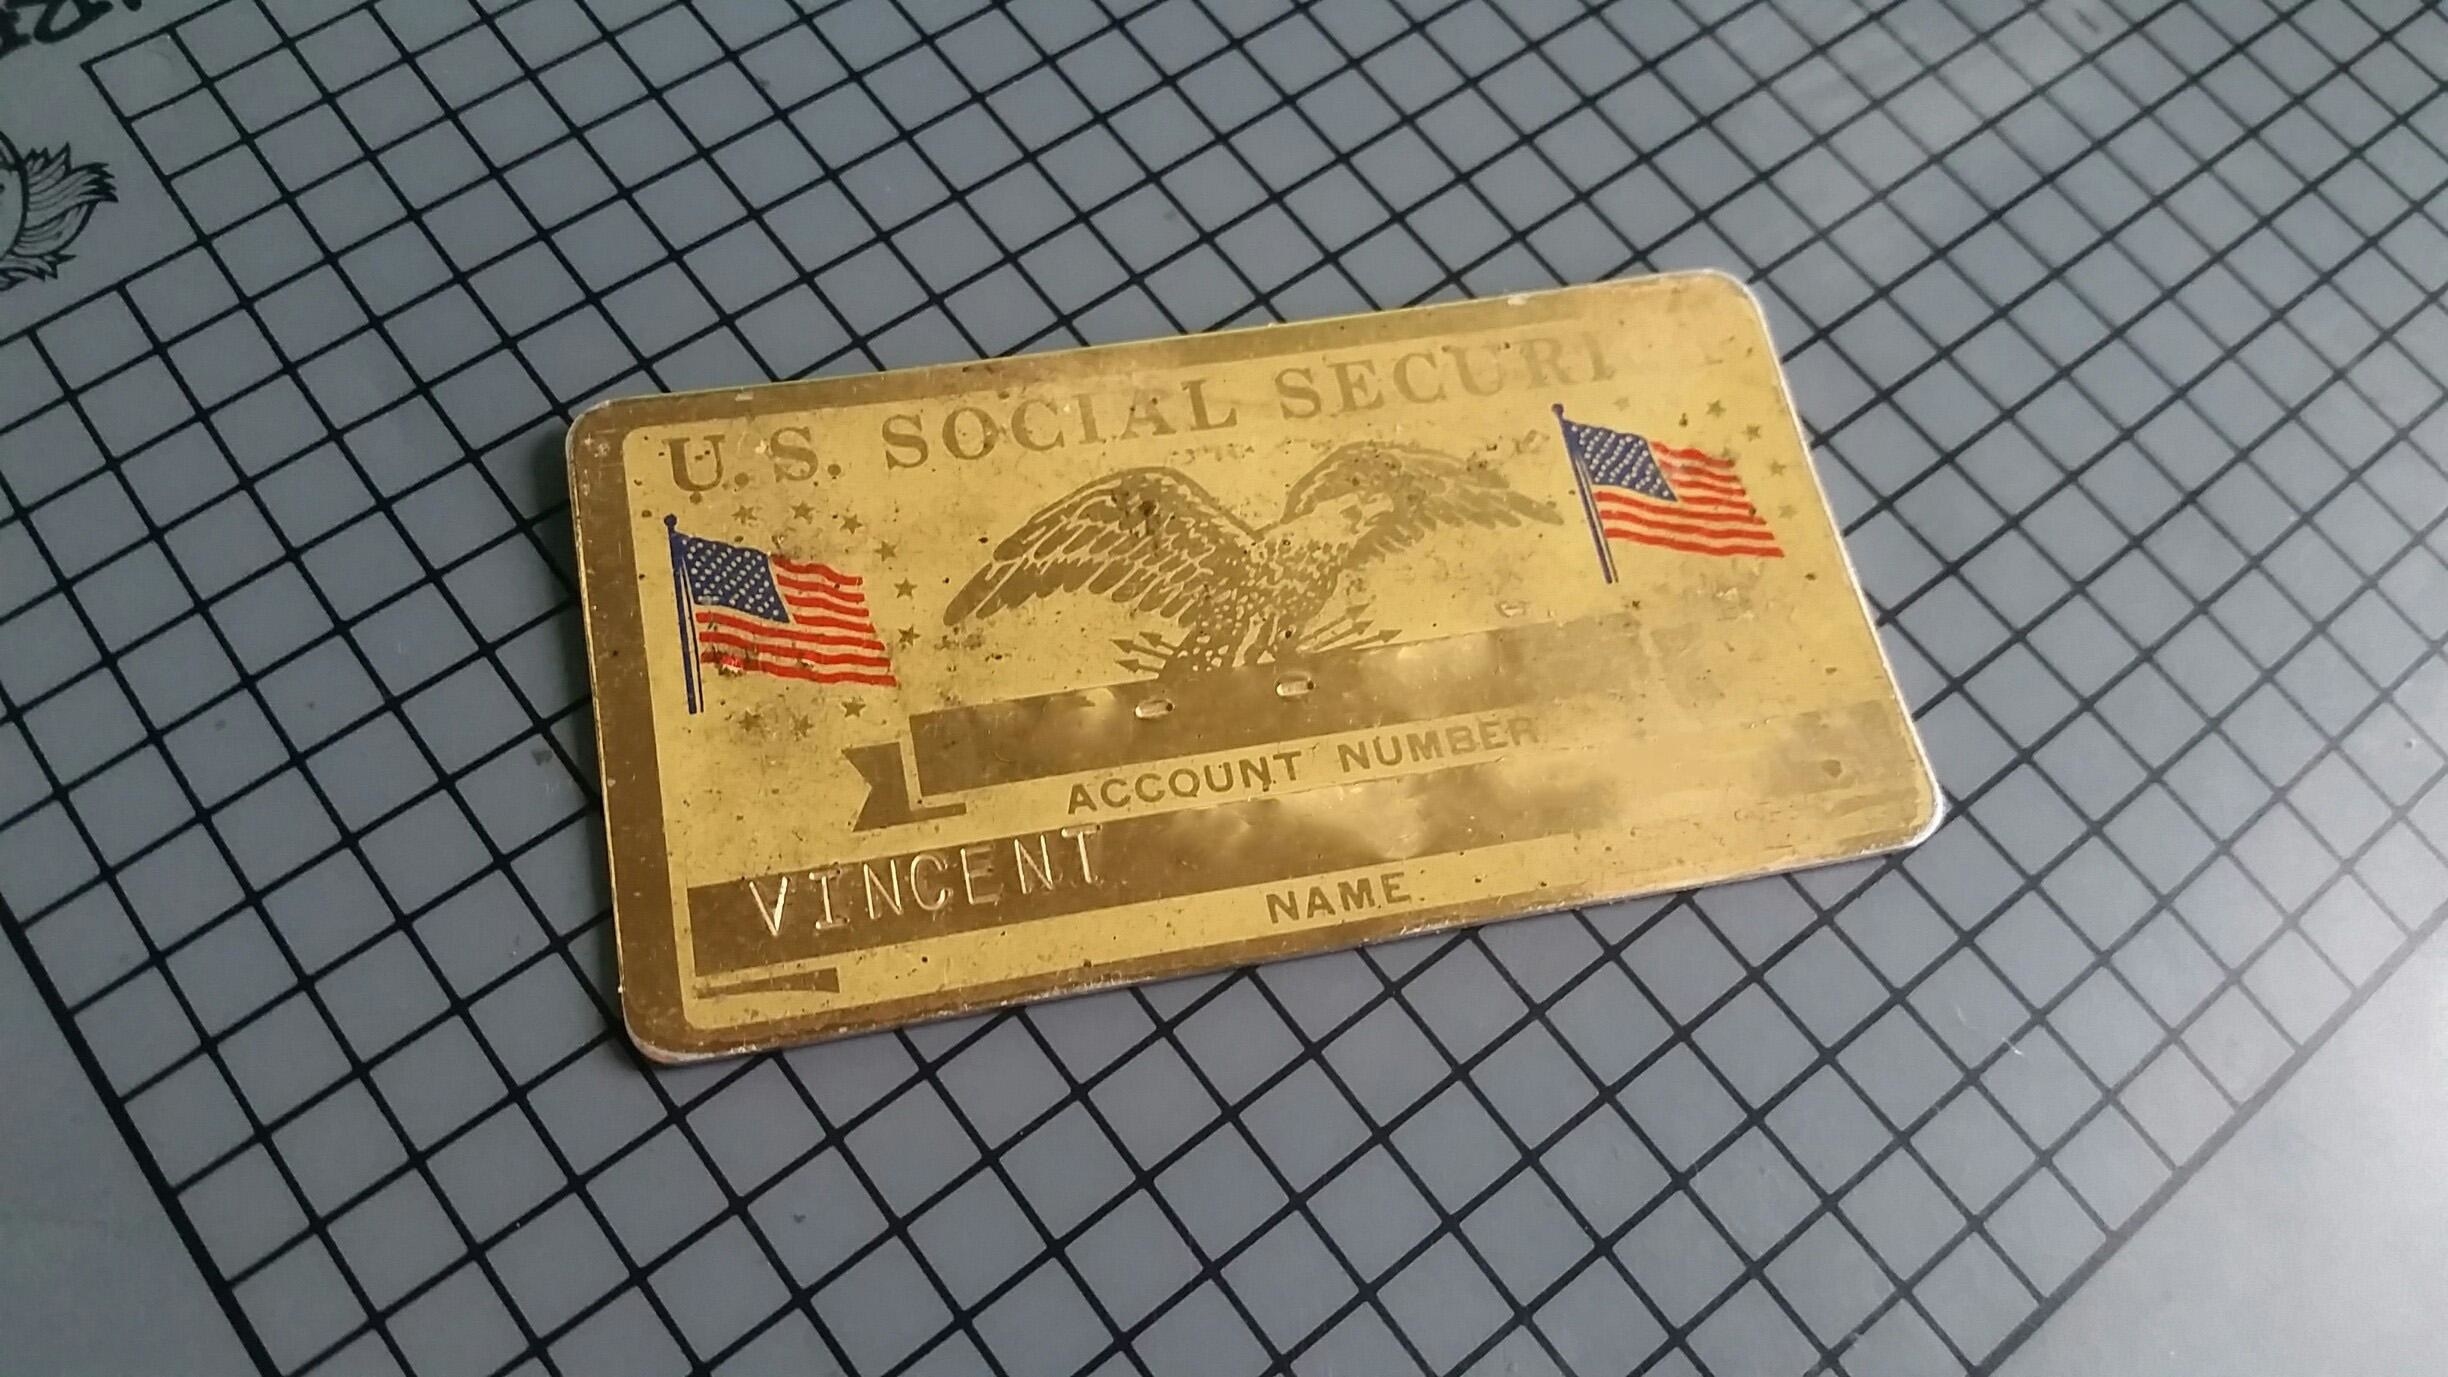 A firm-looking Social Security card